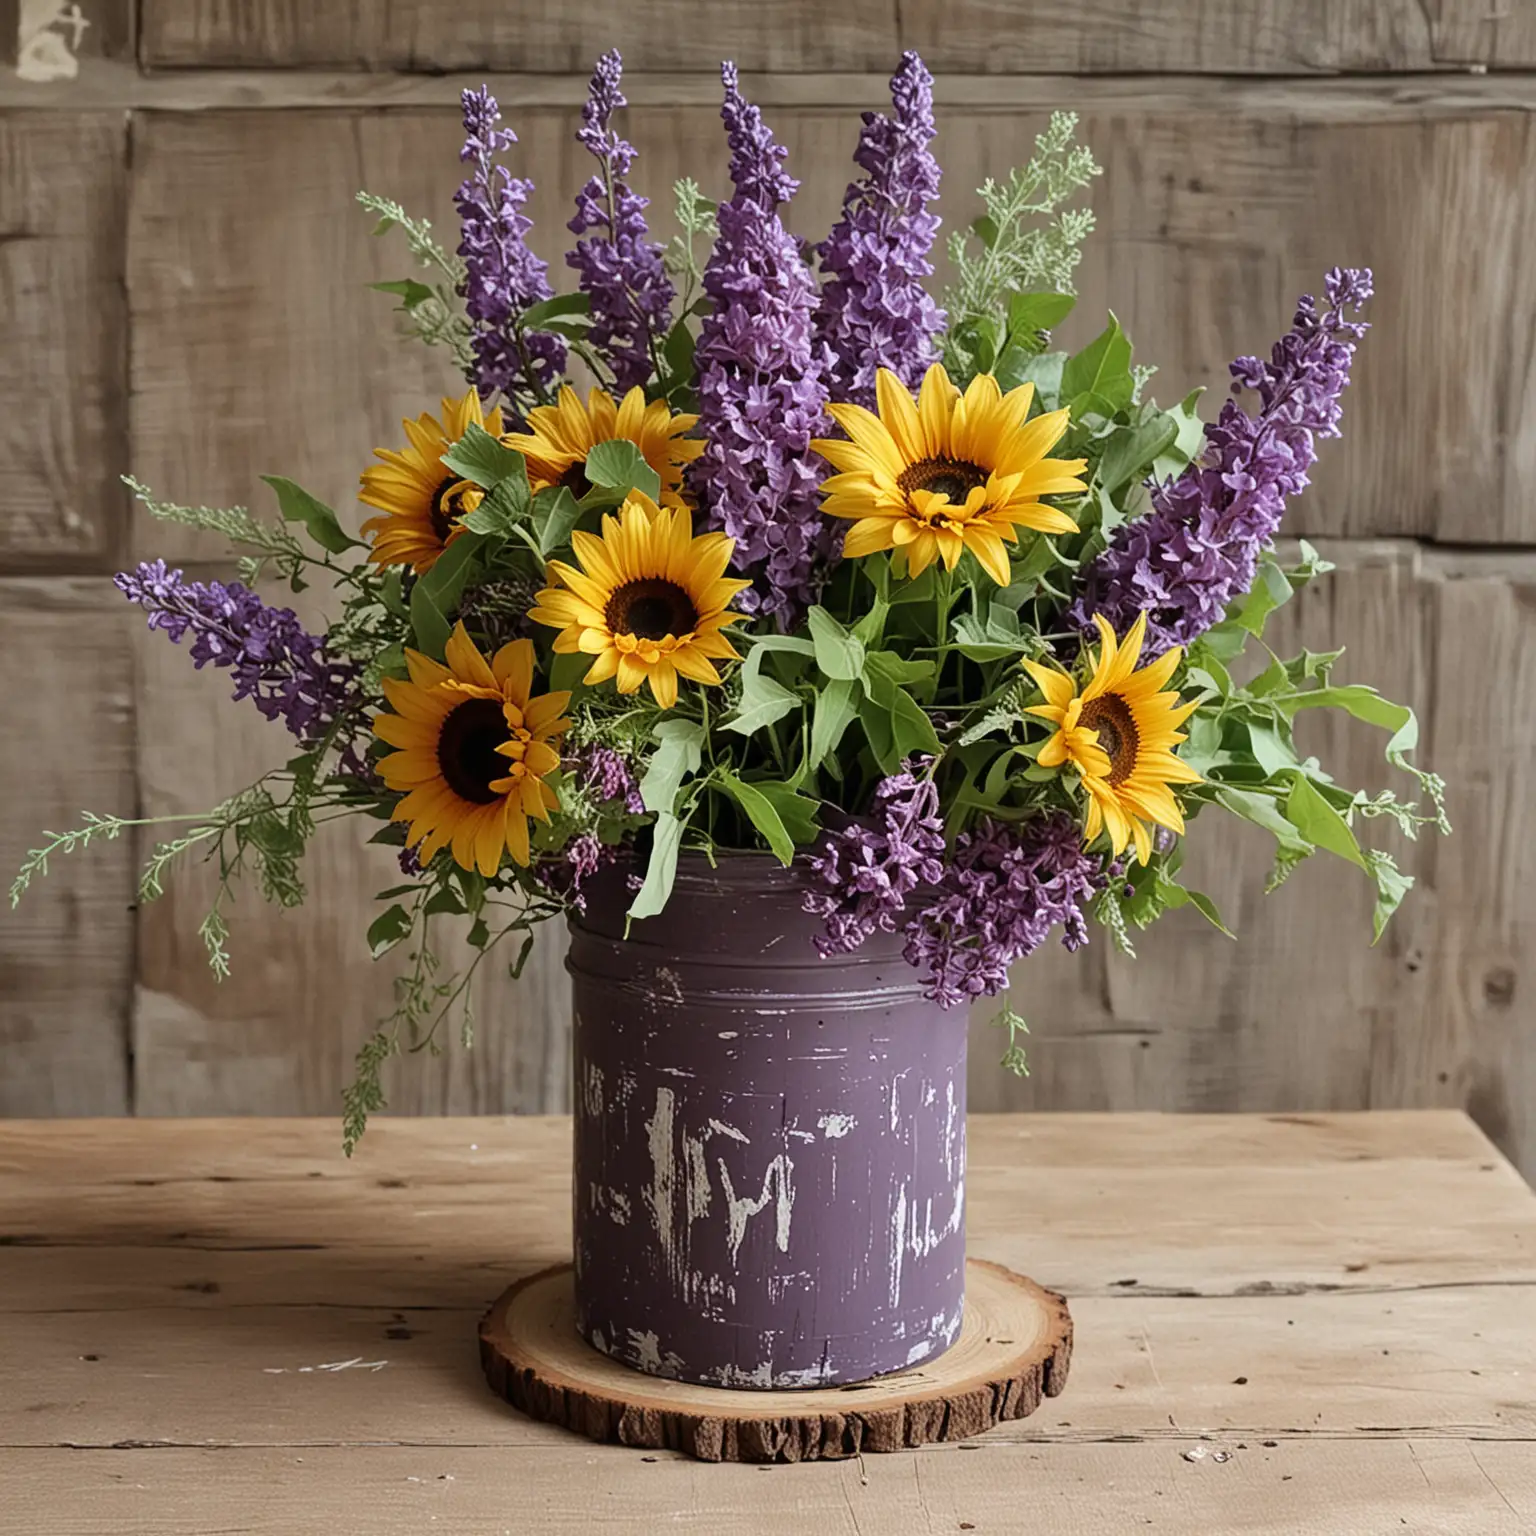 a simple and small worn, rustic centerpiece for a wedding with a rustic and work vase painted distressed purple and filled with sunflowers and lilacs